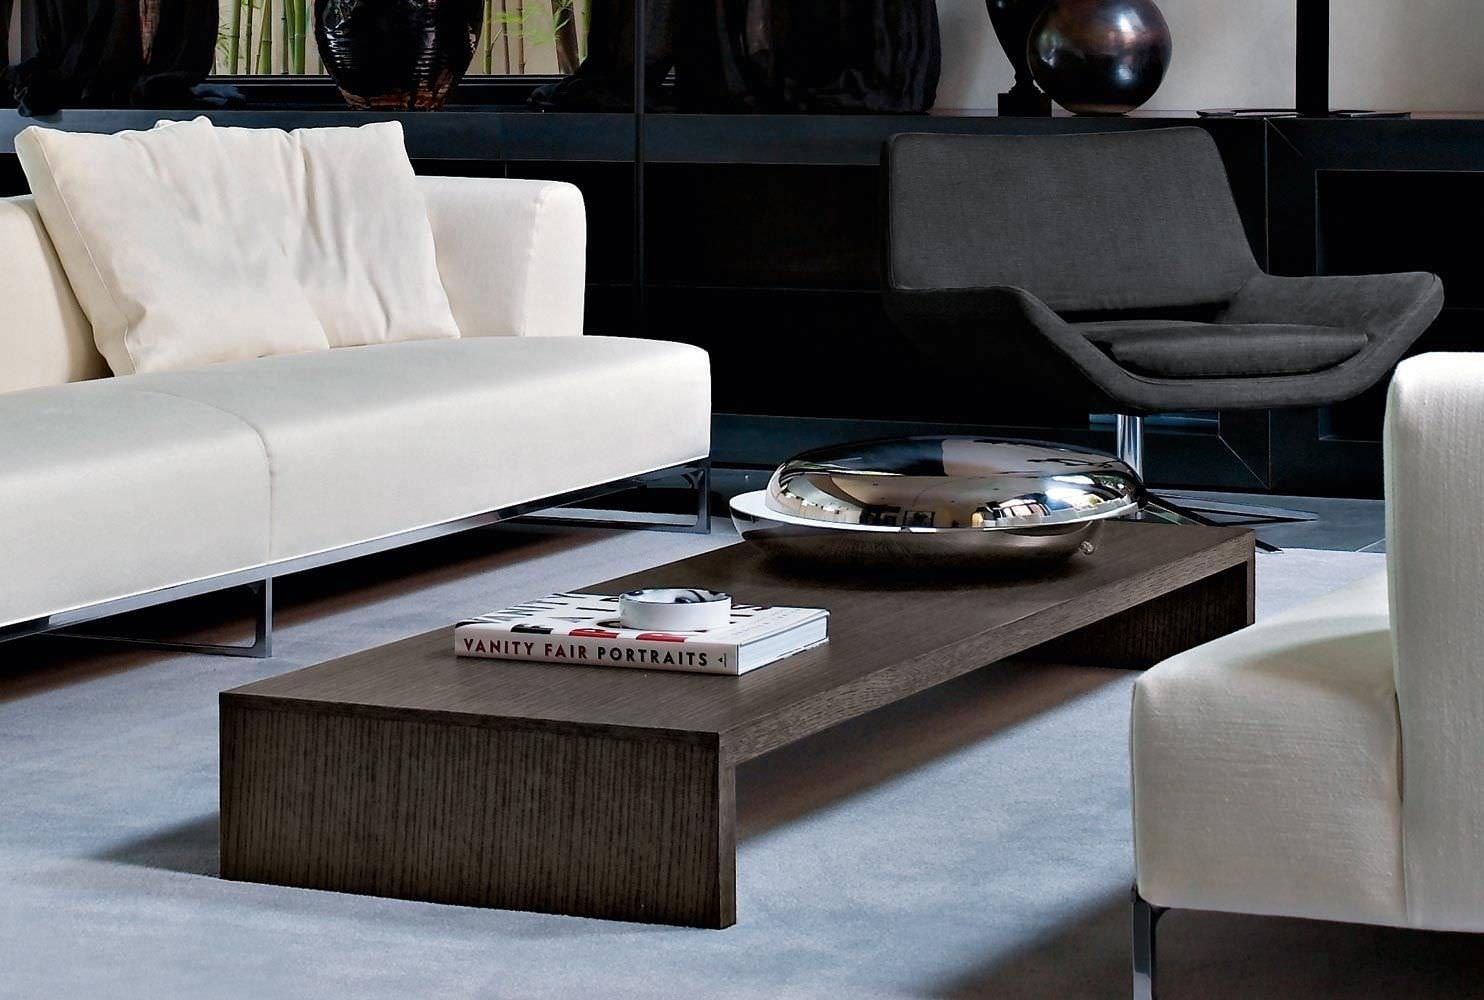 Several Cool Coffee Table To Serve The Best Welcoming Tone | Homesfeed Intended For Short Legs Coffee Tables (View 5 of 30)